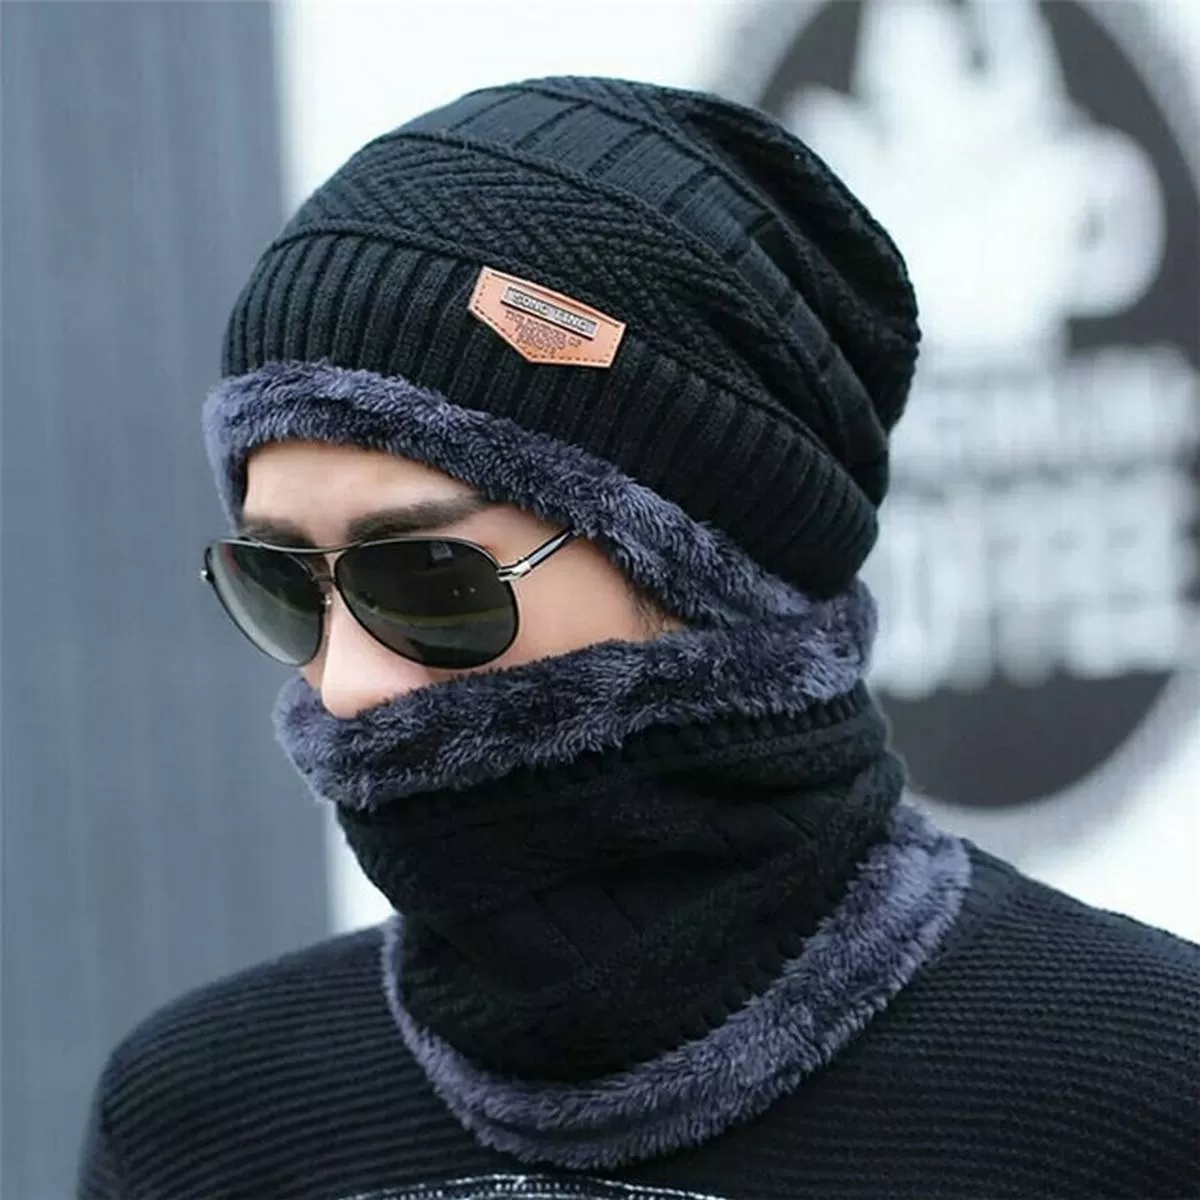 Unisex Winter Knitted Hat Warm Thick Add Lined Beanies Hats With